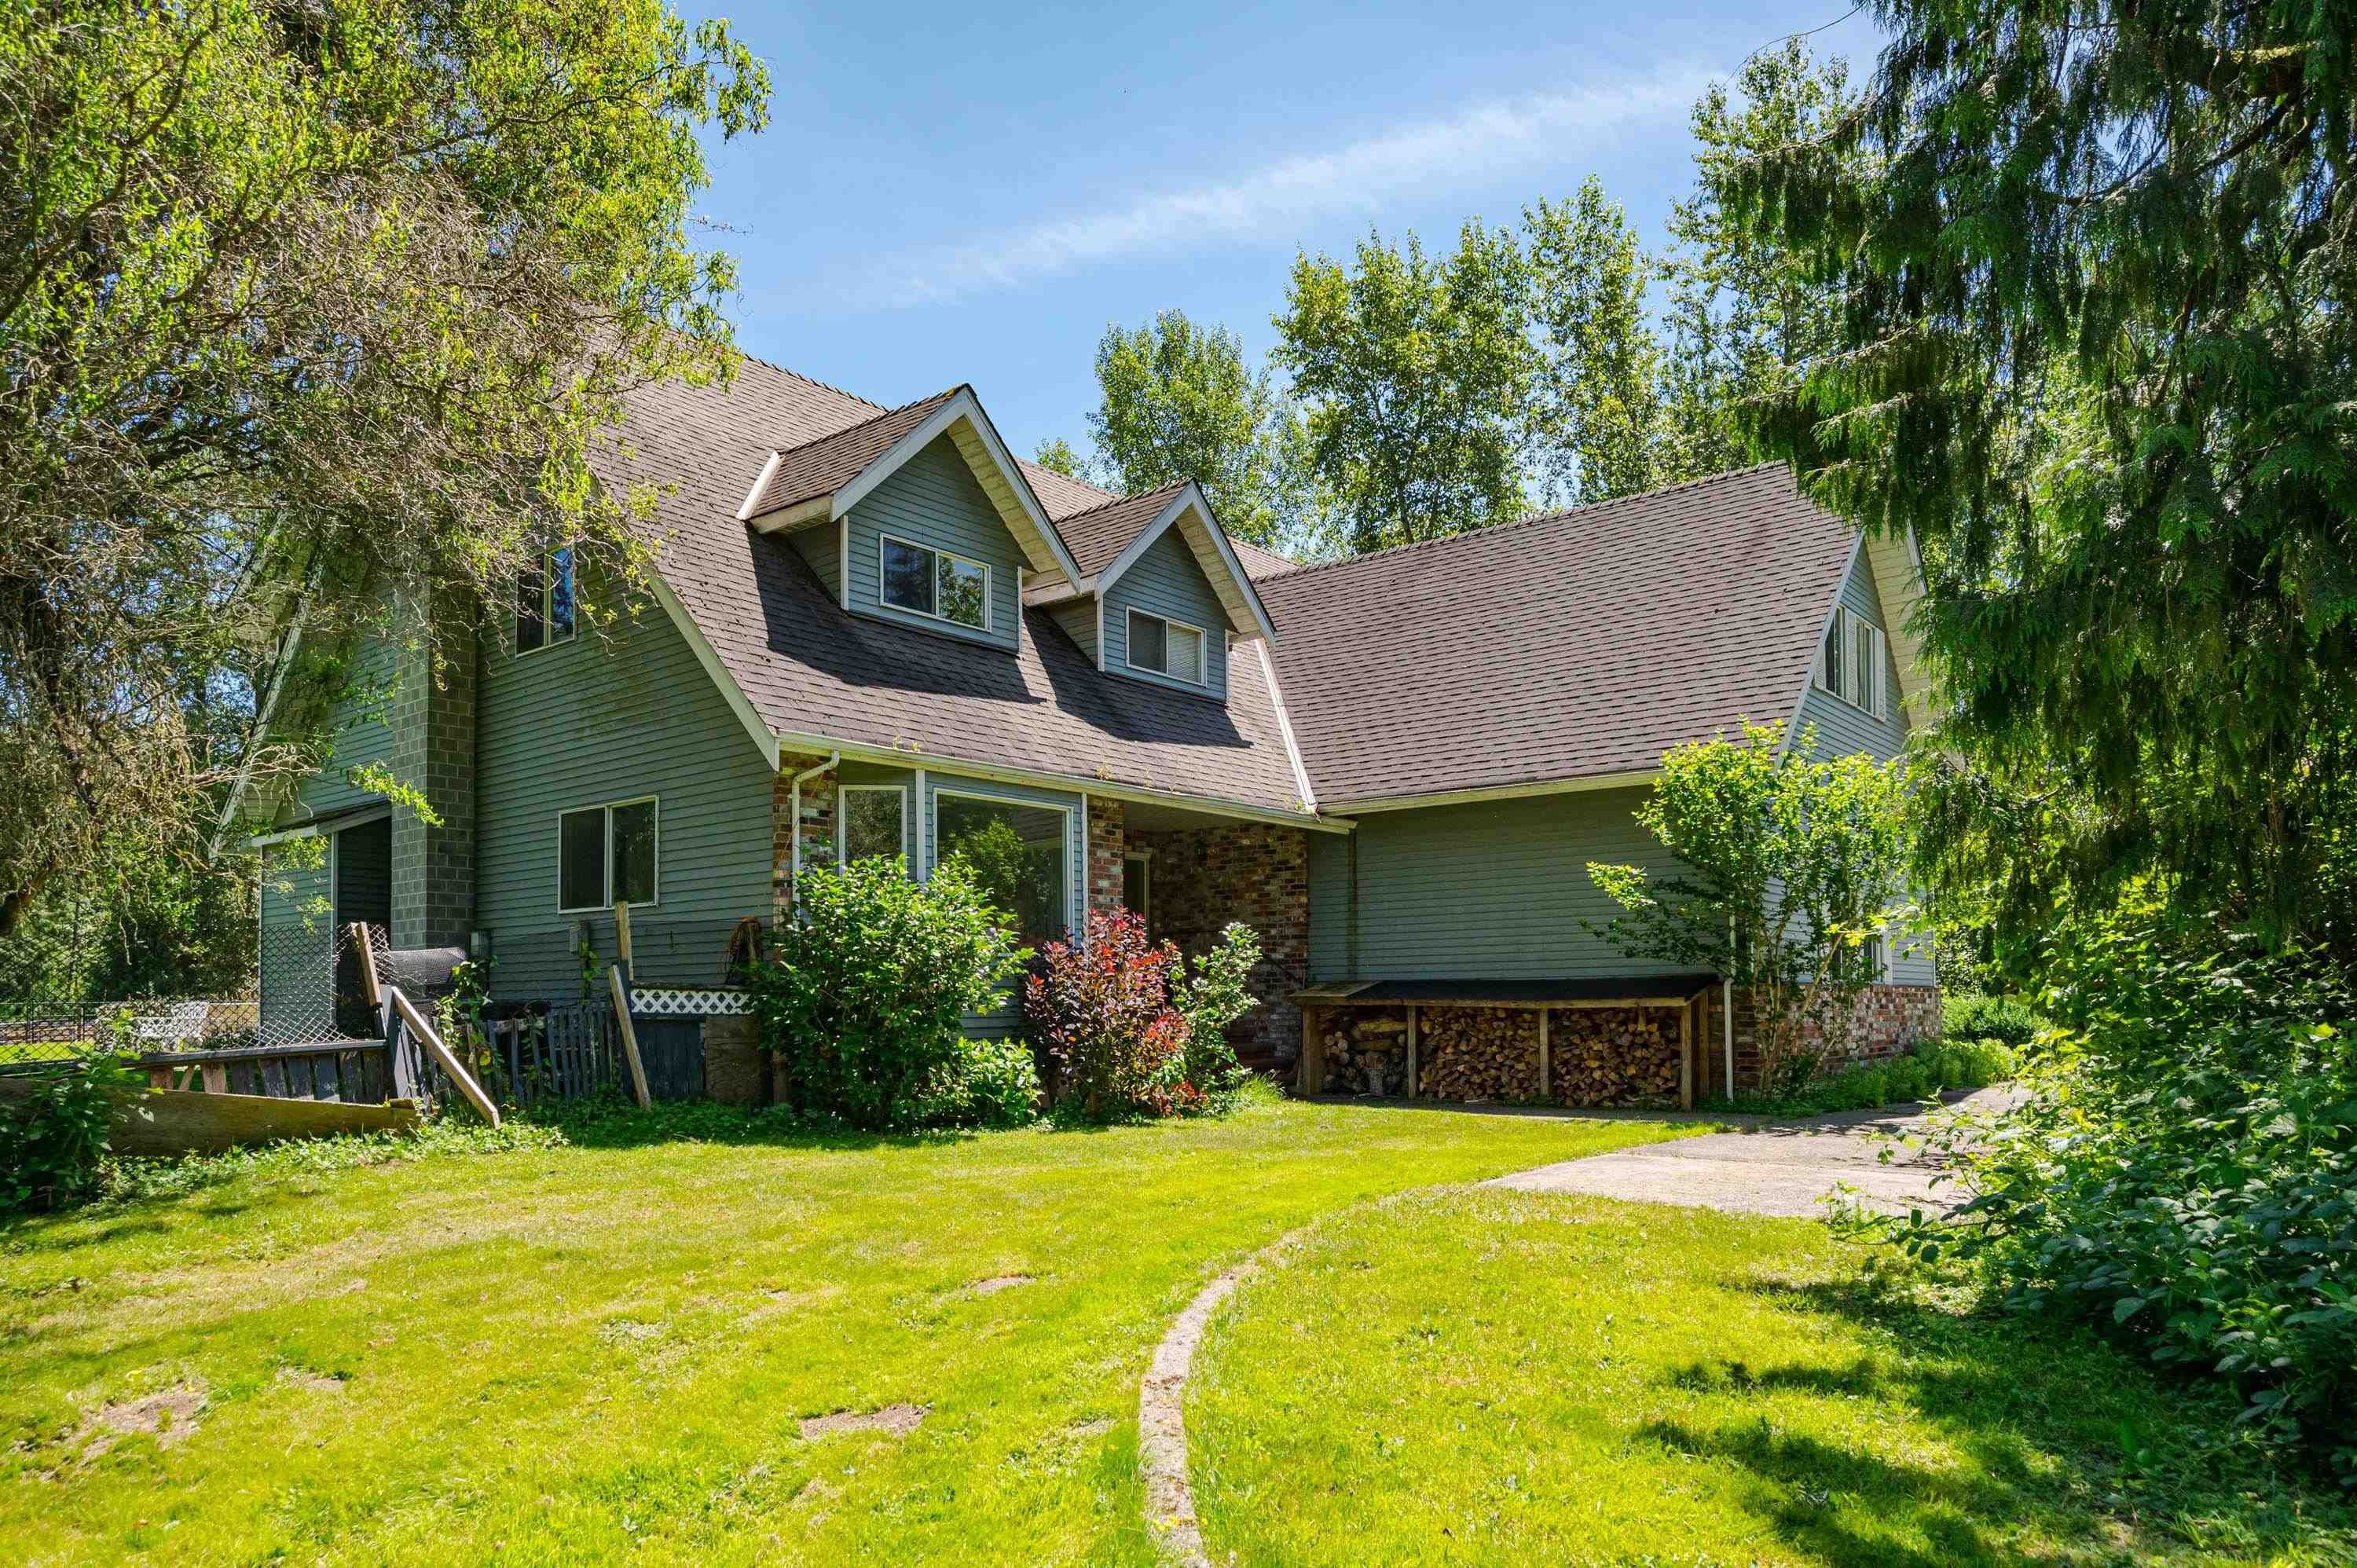 Main Photo: 7558 258 STREET in : County Line Glen Valley House for sale : MLS®# R2711093